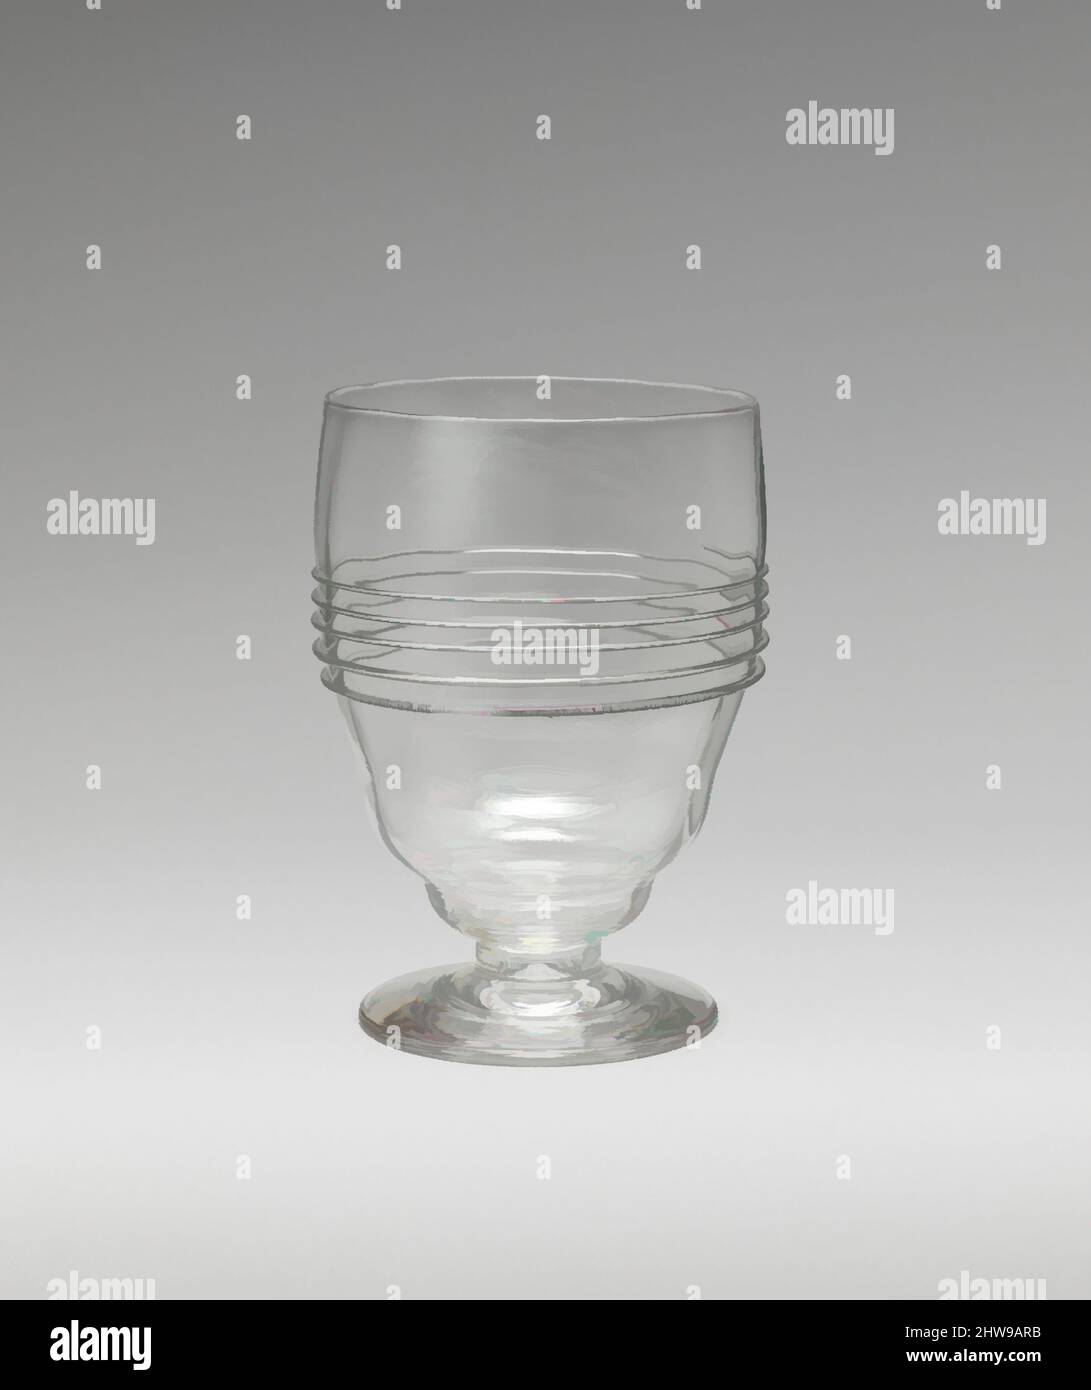 Art inspired by Footed goblet with bulging bowl, 1860, British, London, Glass, confirmed: 4 3/4 × 3 3/8 × 3 3/8 in. (12.1 × 8.6 × 8.6 cm), Glass, James Powell and Sons, Classic works modernized by Artotop with a splash of modernity. Shapes, color and value, eye-catching visual impact on art. Emotions through freedom of artworks in a contemporary way. A timeless message pursuing a wildly creative new direction. Artists turning to the digital medium and creating the Artotop NFT Stock Photo